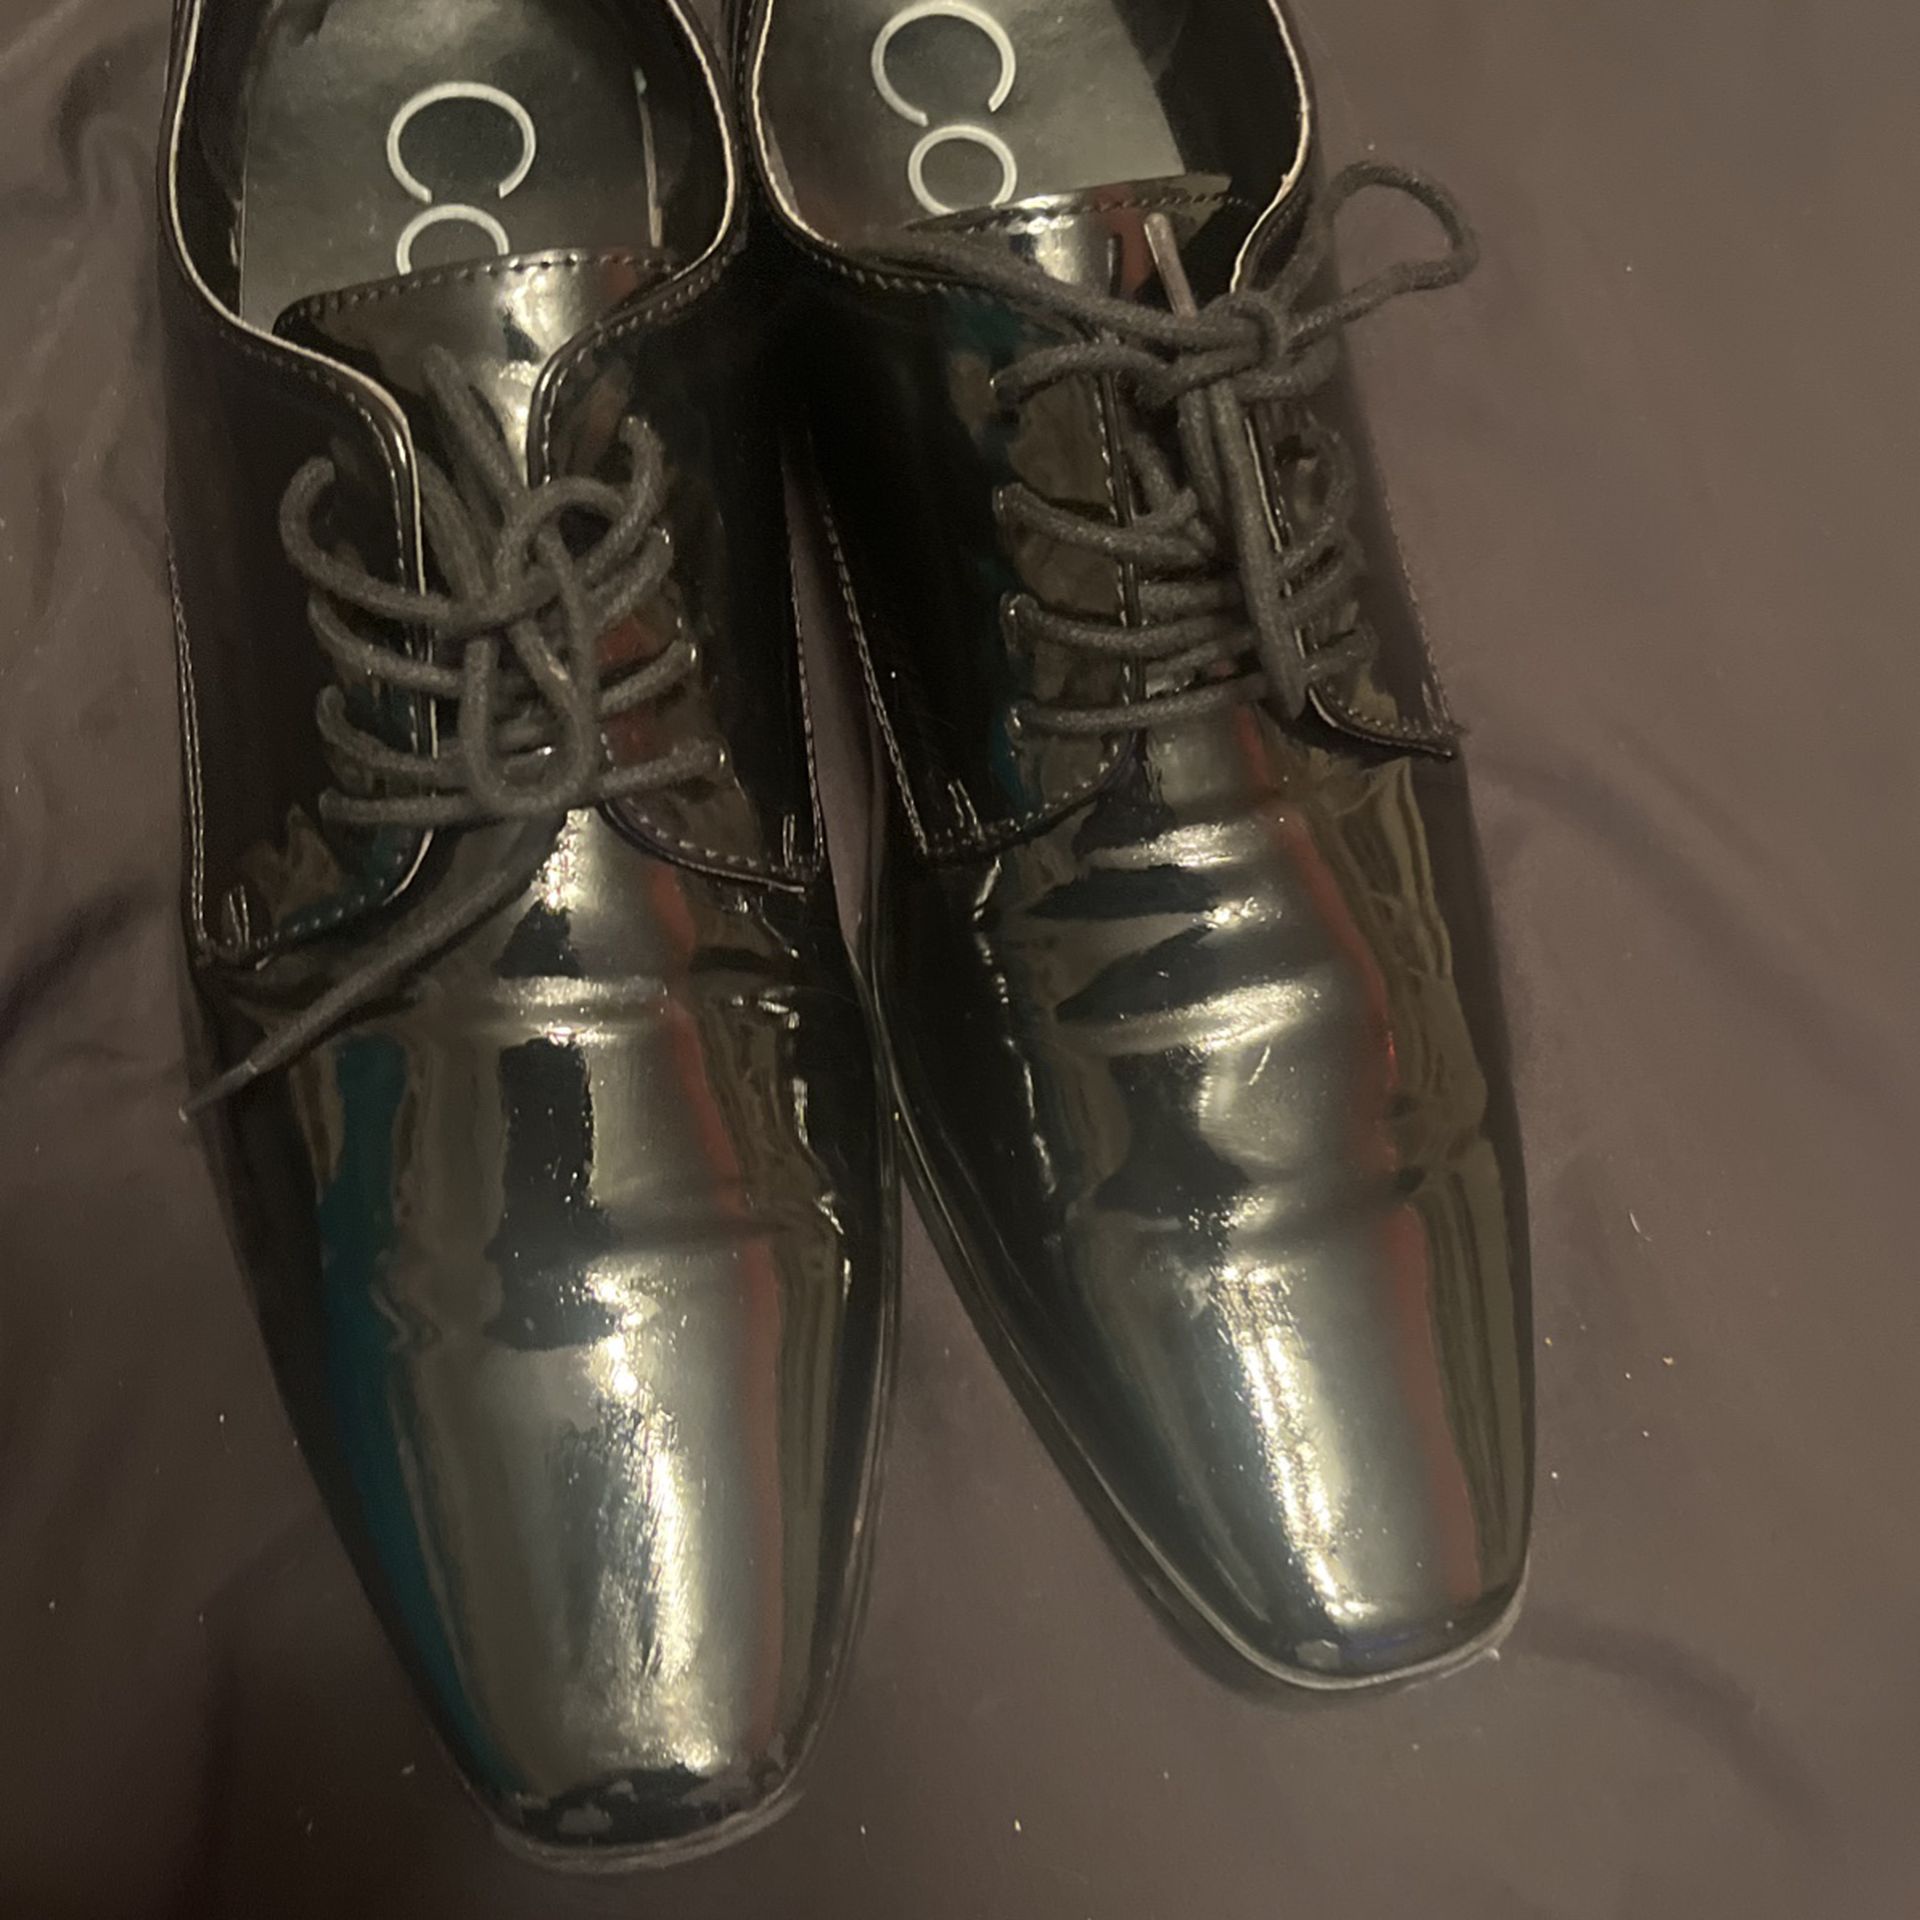 Calvin Klein Dress Shoes for Sale in Houston, TX - OfferUp